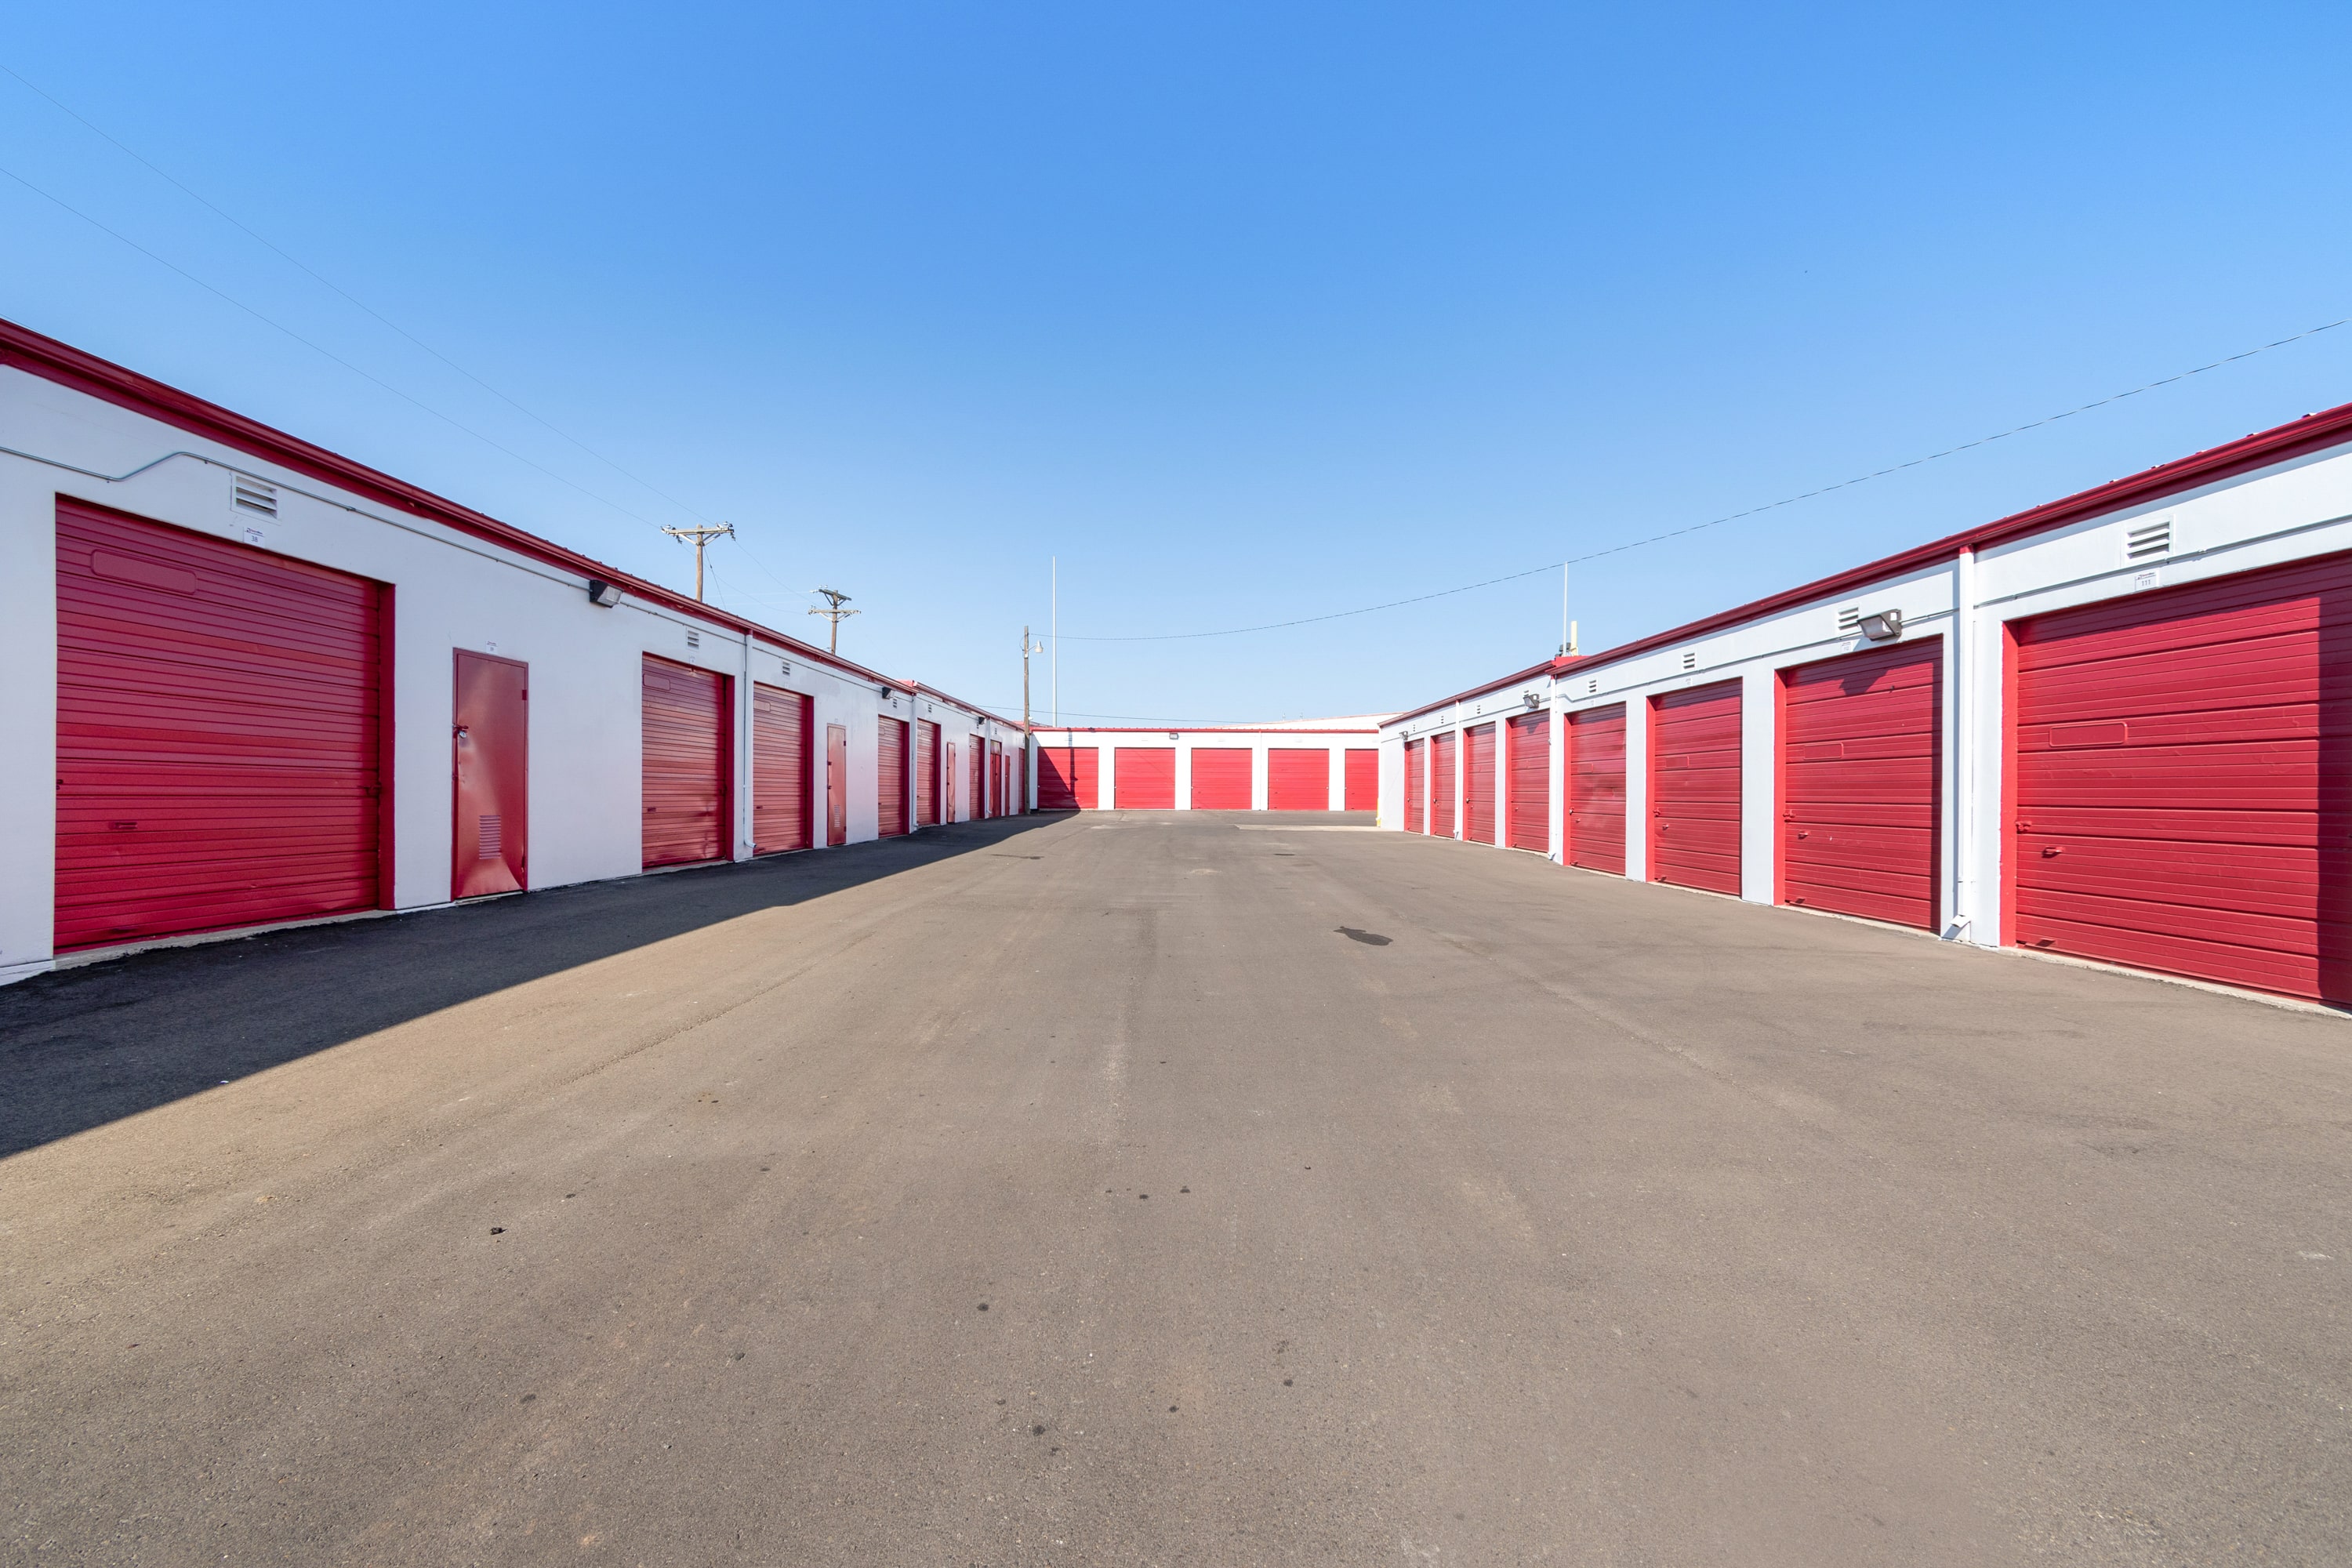 SpareBox Storage has Amarillo self-storage units with different options and amenities | SpareBox Storage